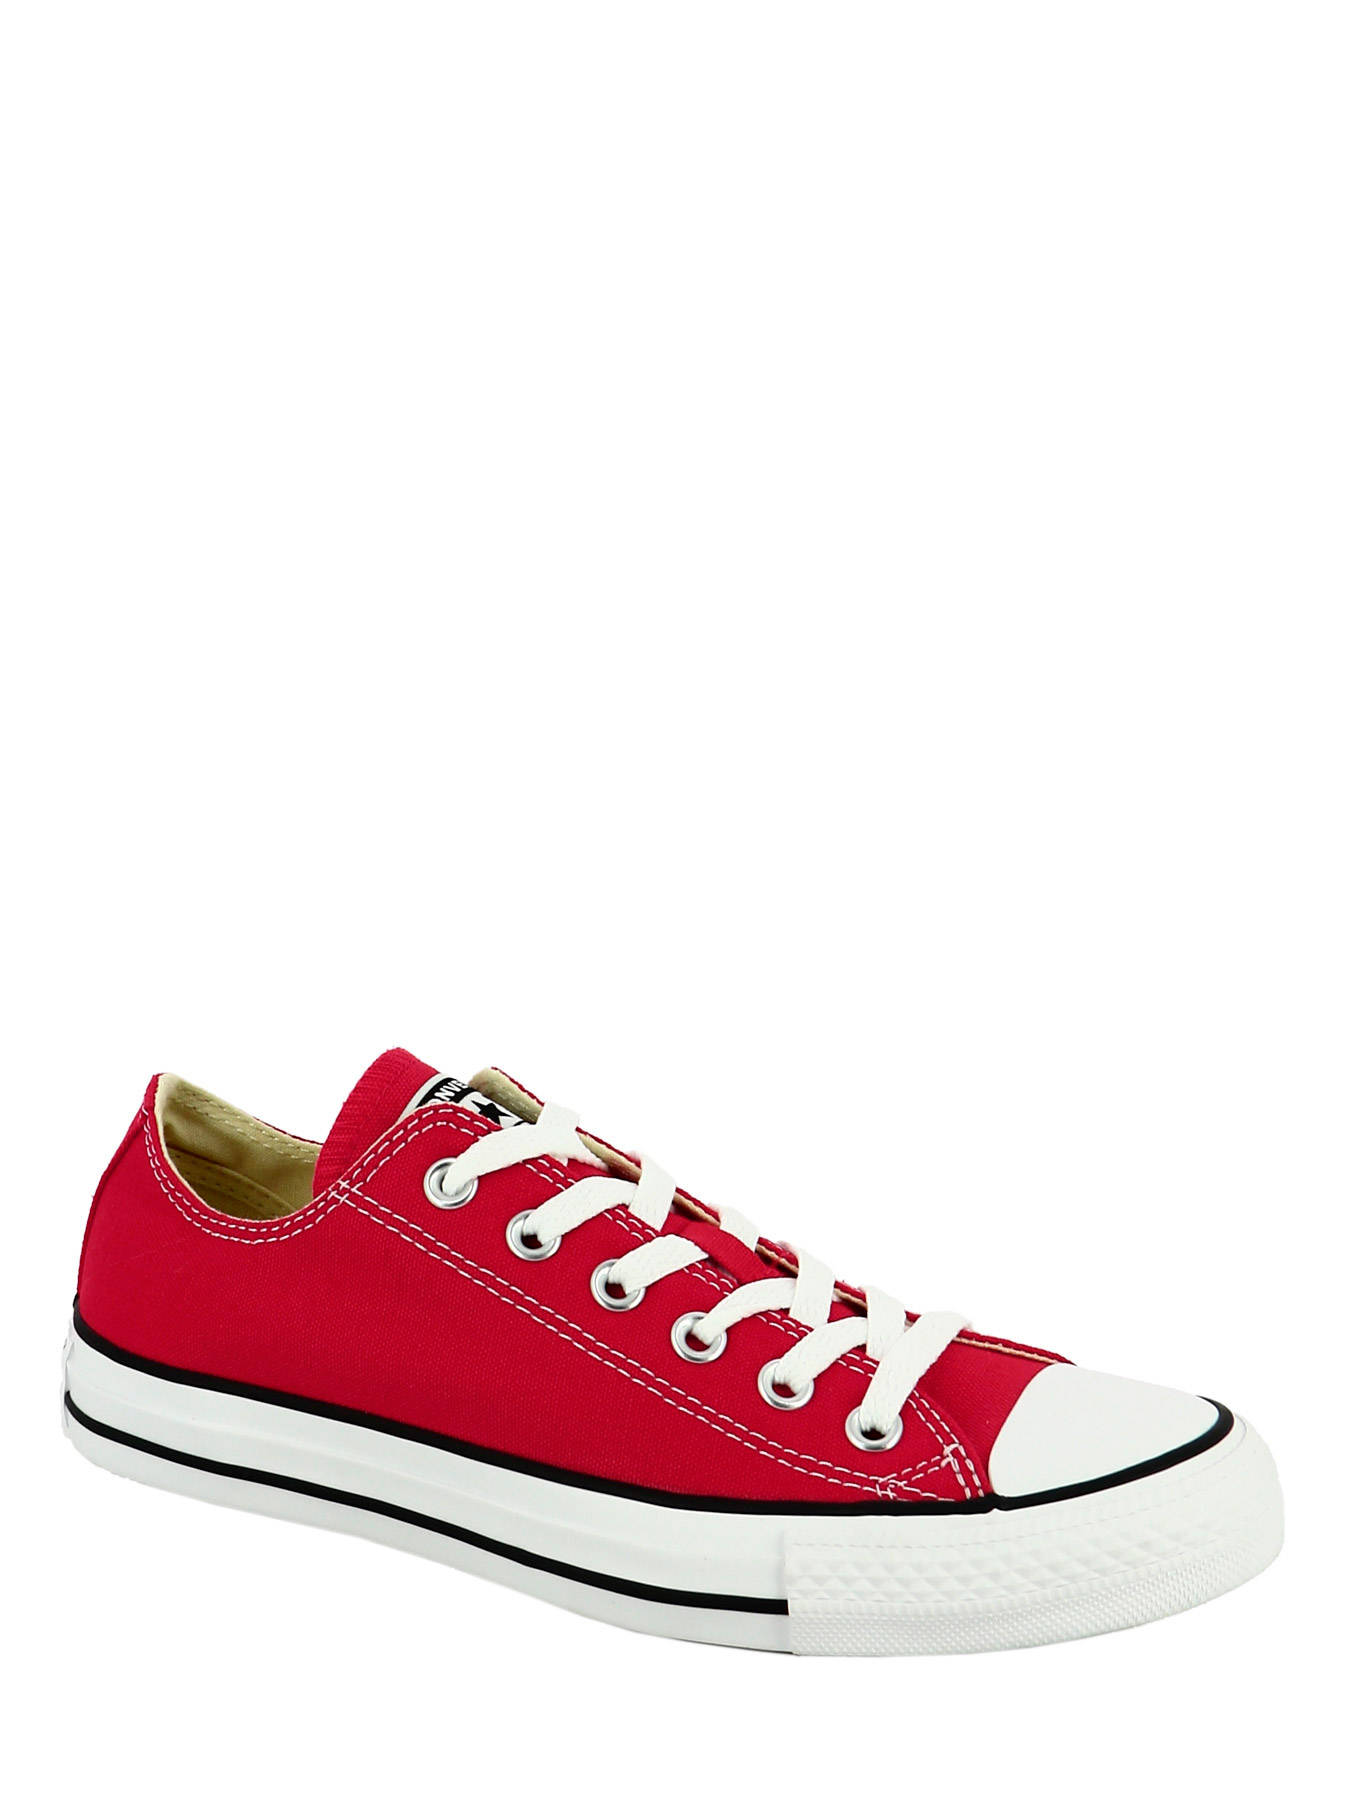 converse chuck taylor all star ox red